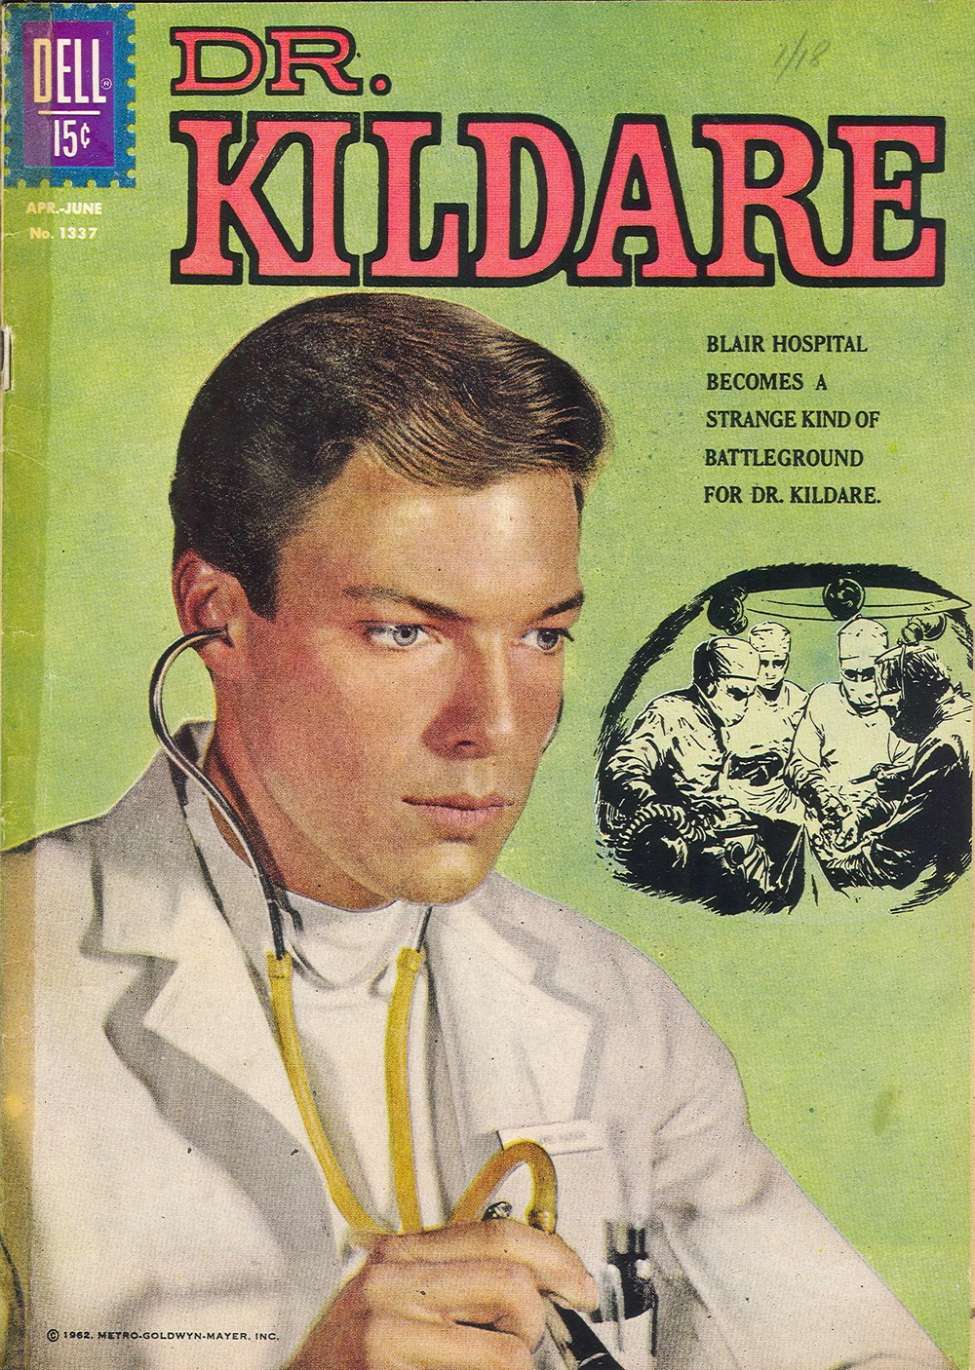 Book Cover For 1337 - Dr. Kildare